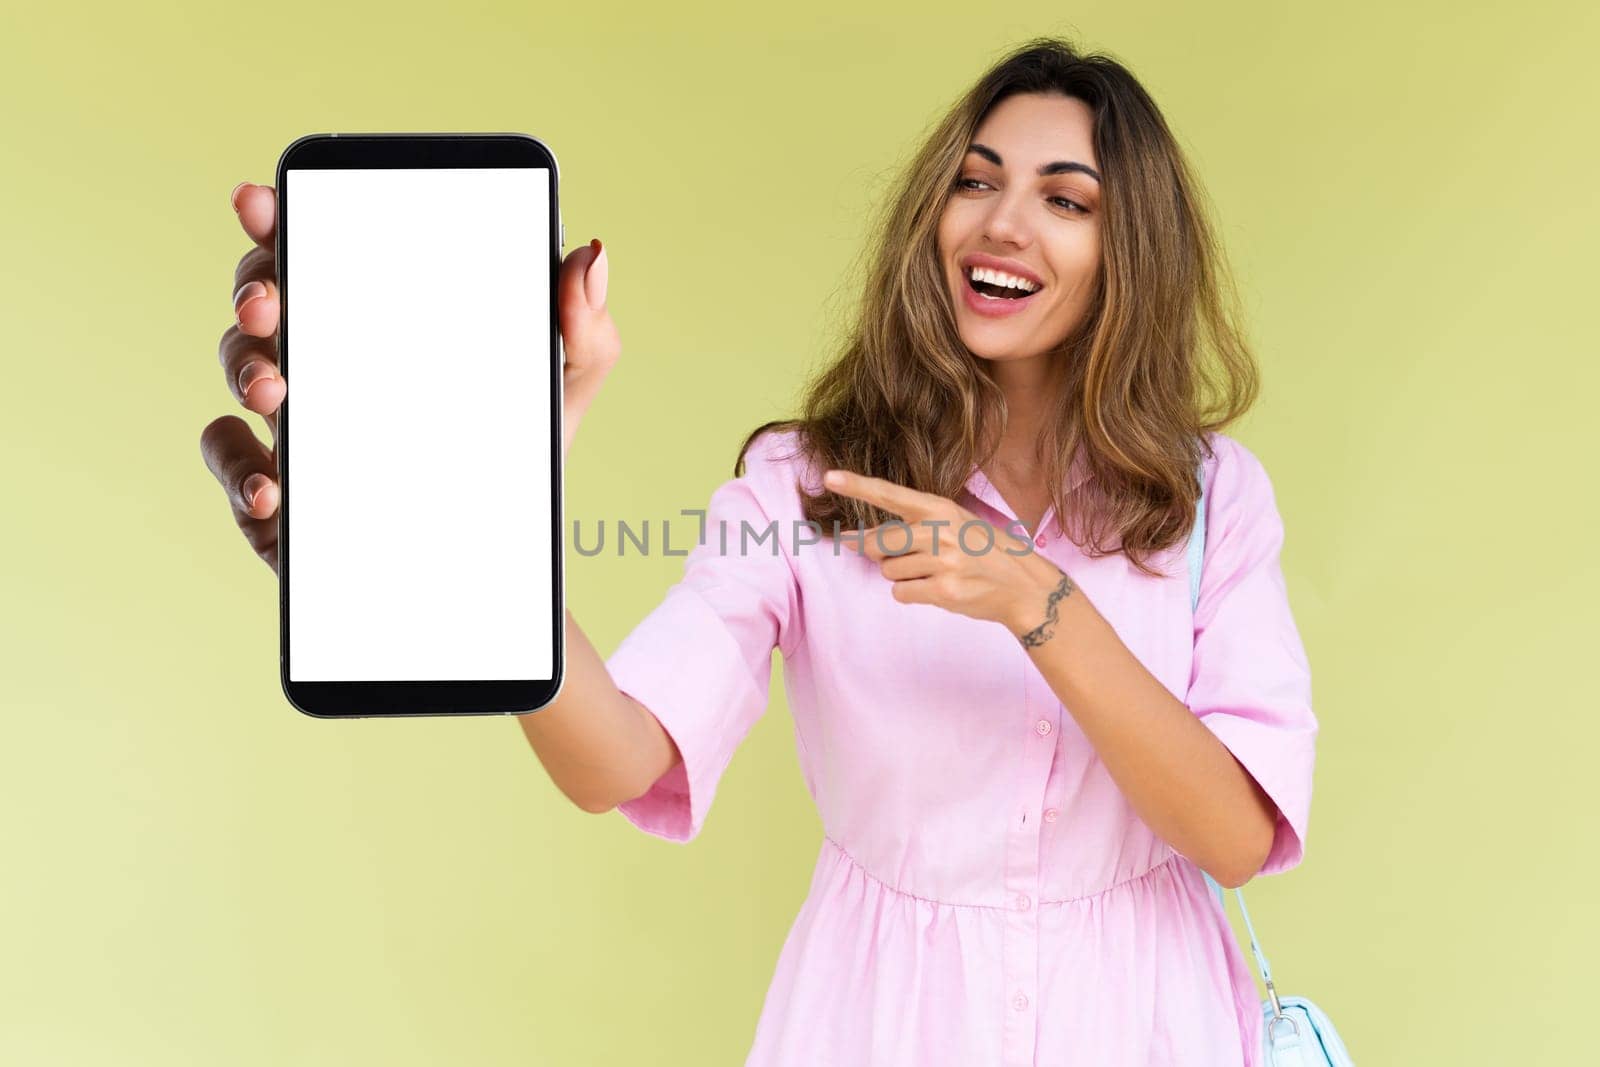 Young woman in casual wear isolated on green background holds a phone with a blank white screen